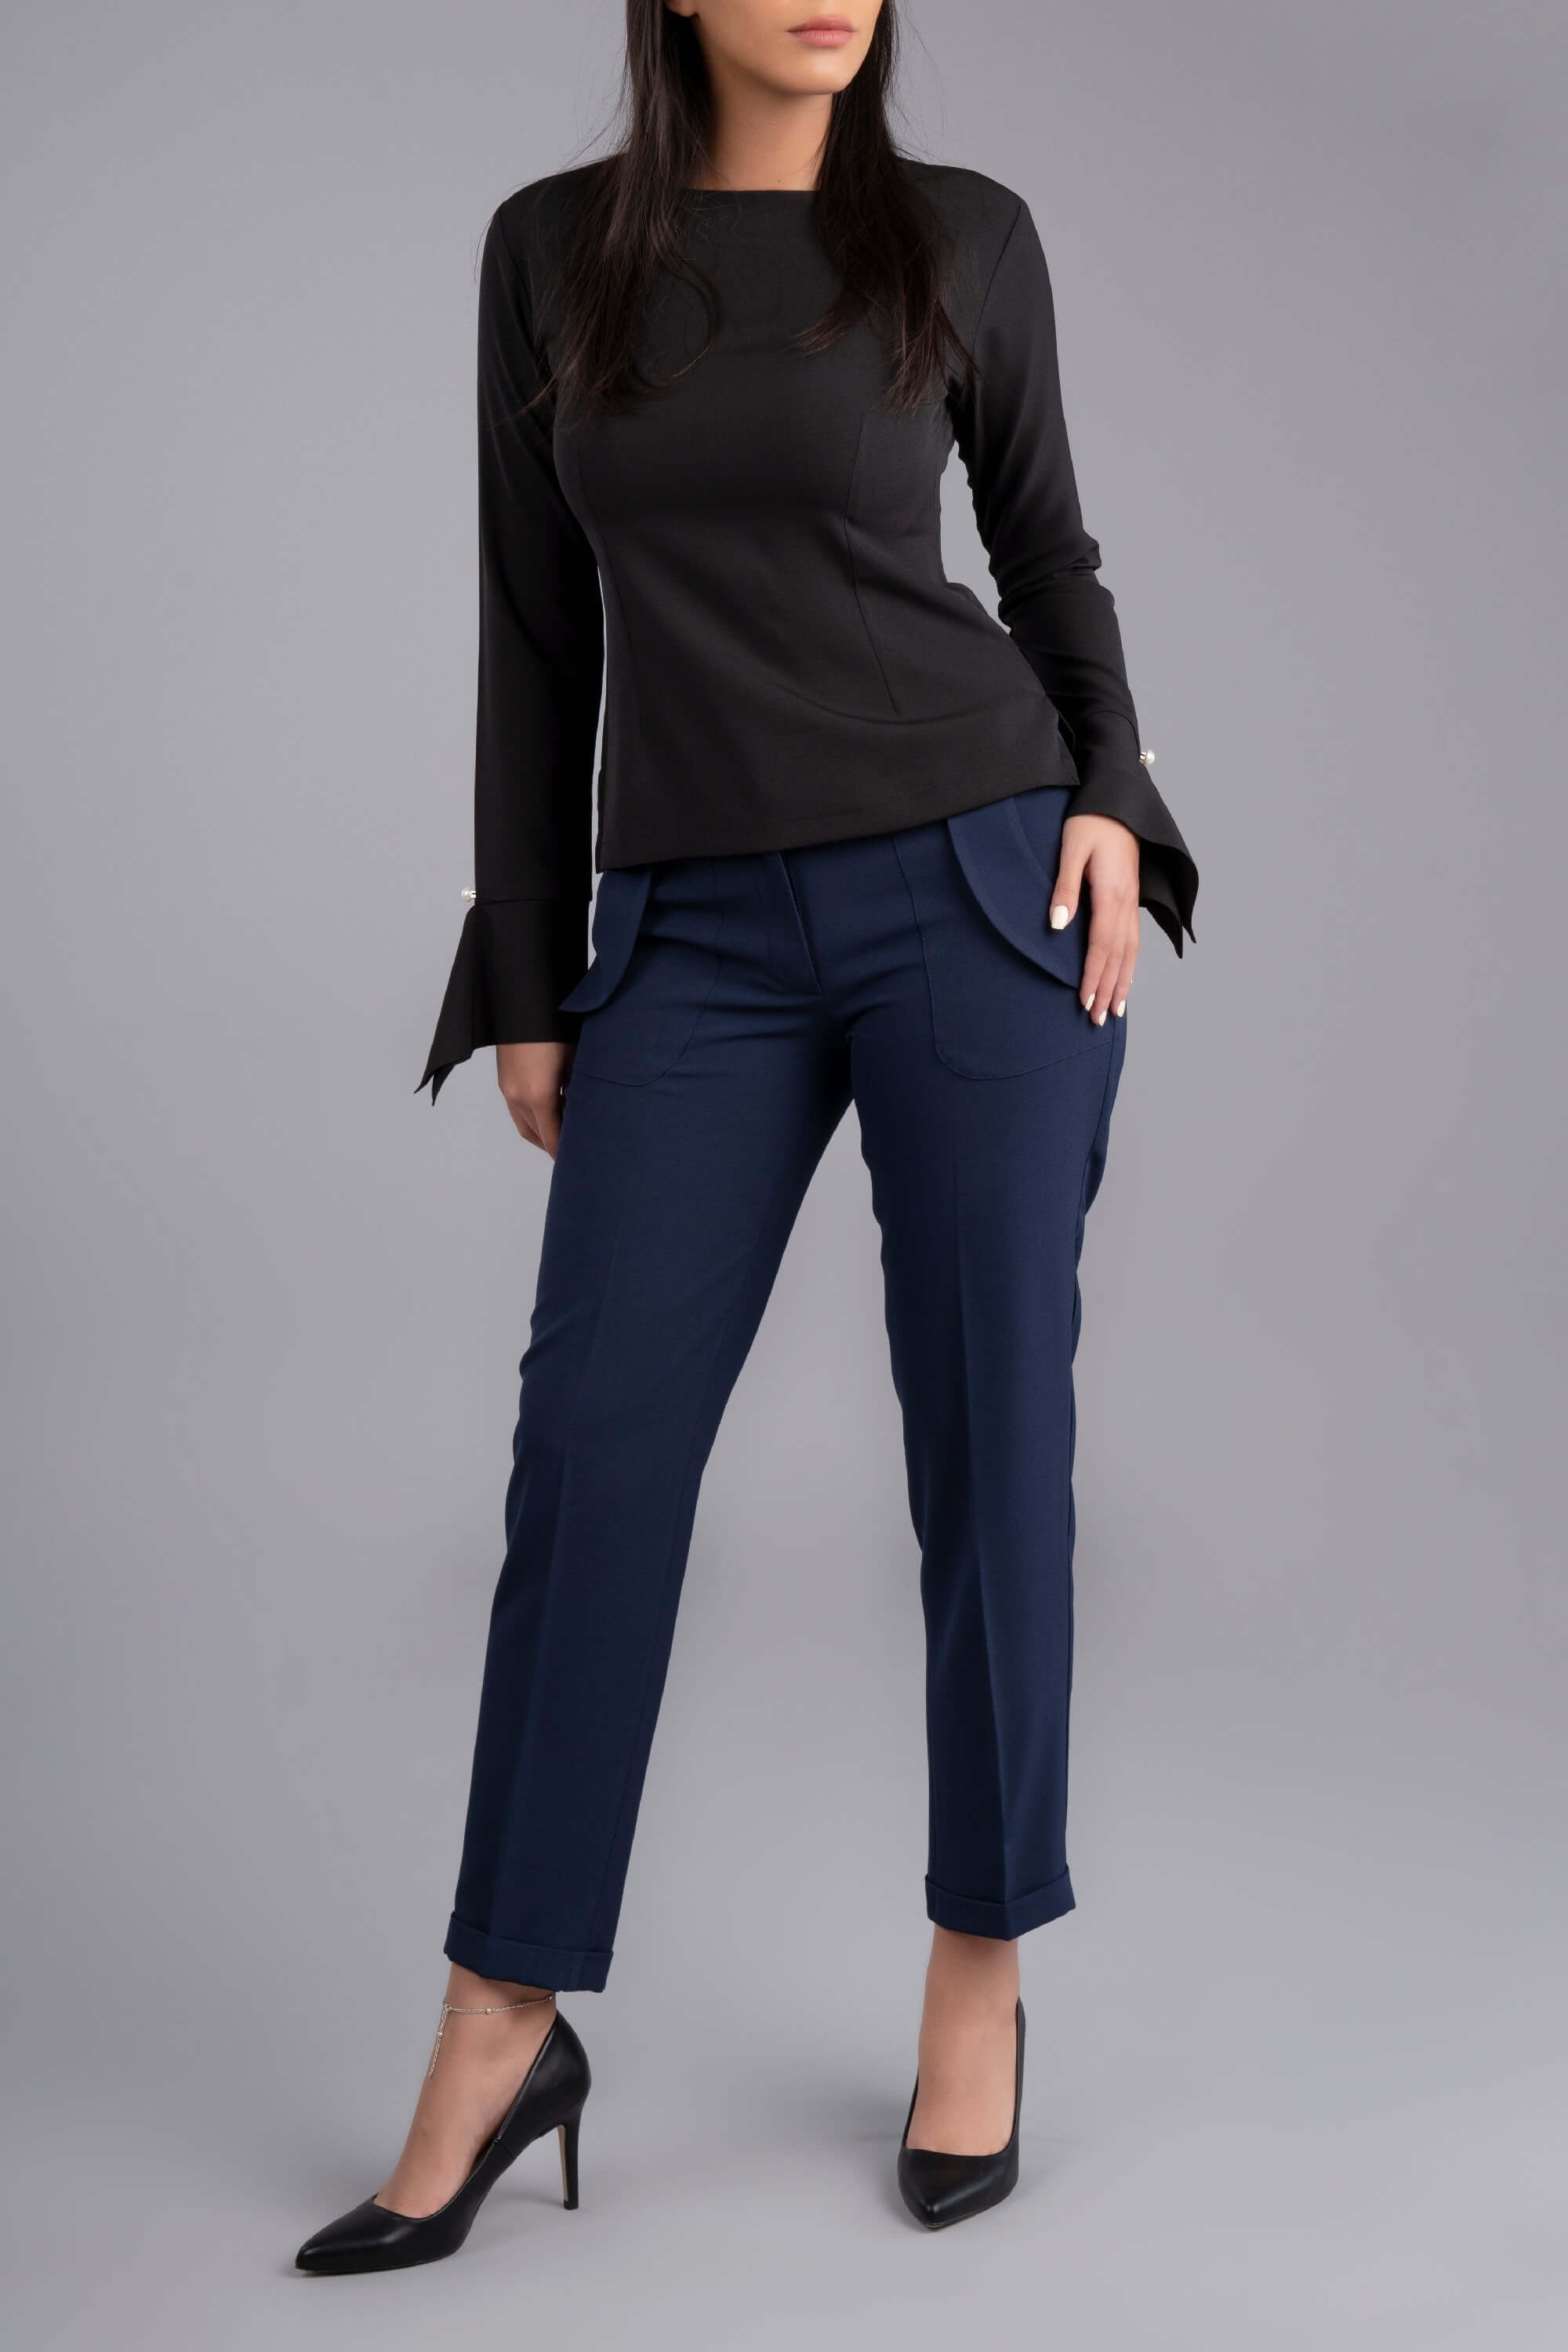 Casela Long Sleeve Blouse Slitted Cuff with Pearl Button-Black - The Modernest